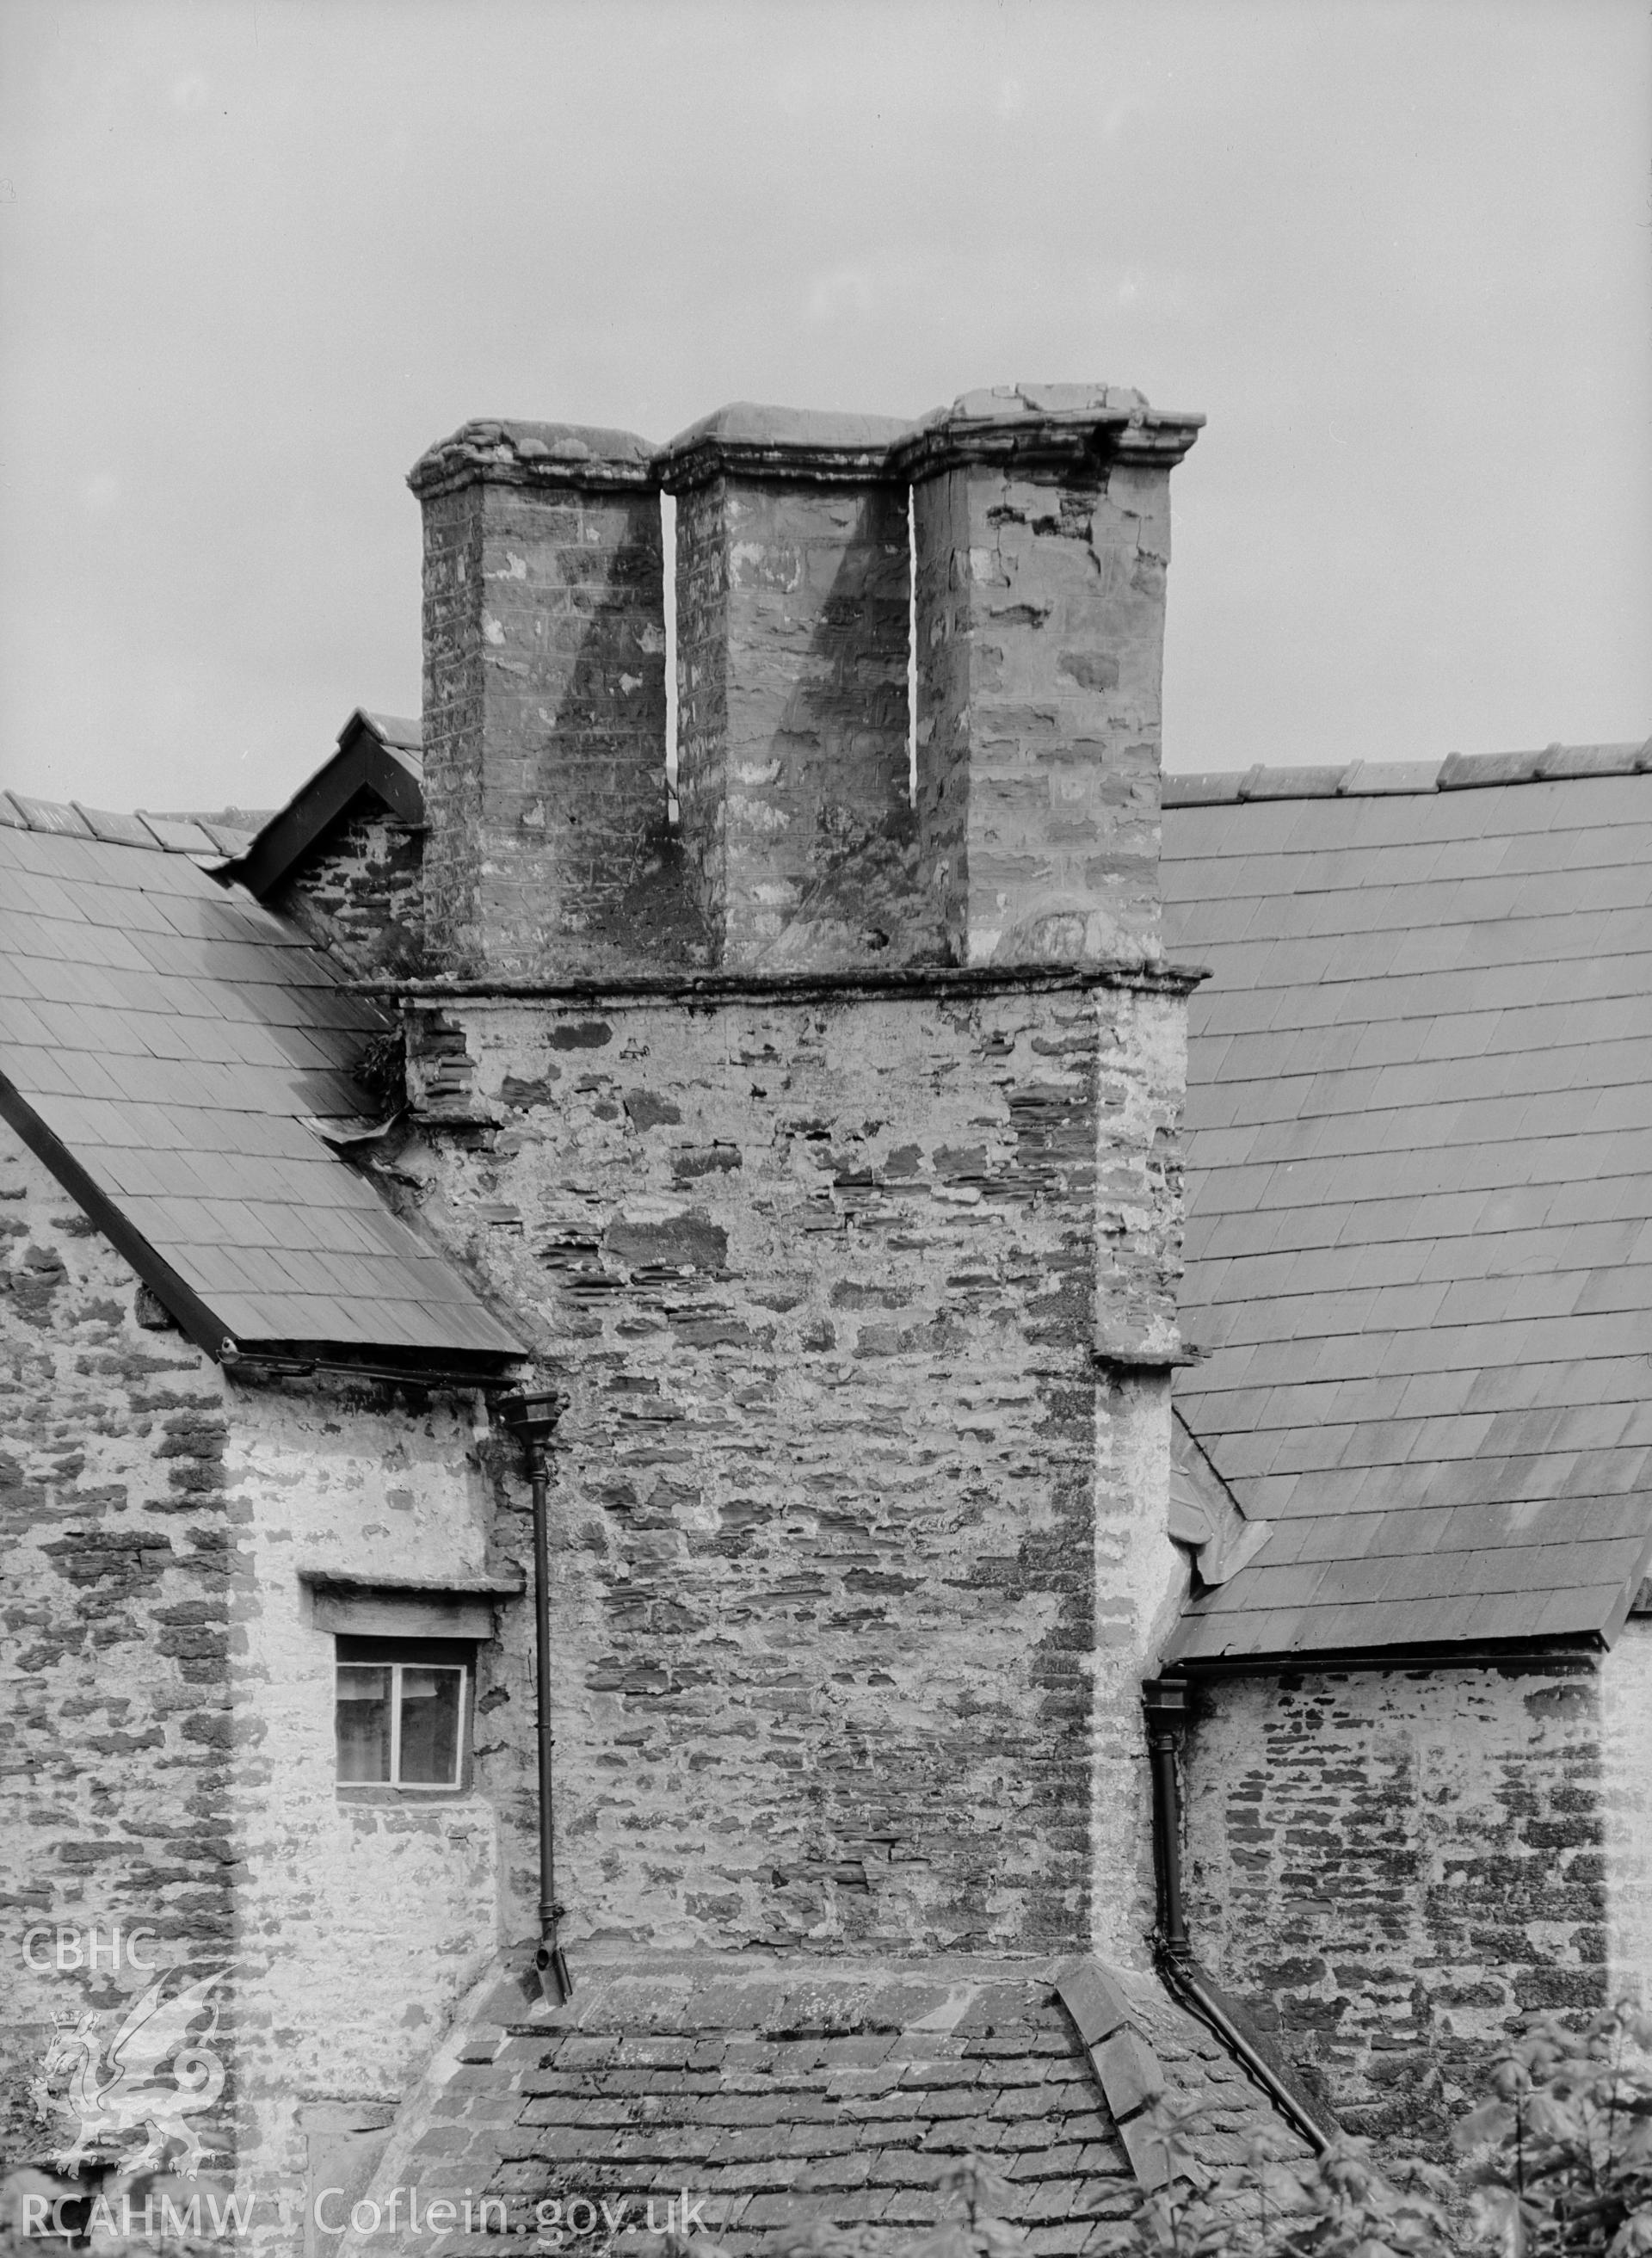 Exterior view of farmhouse from west showing close-up of chimney